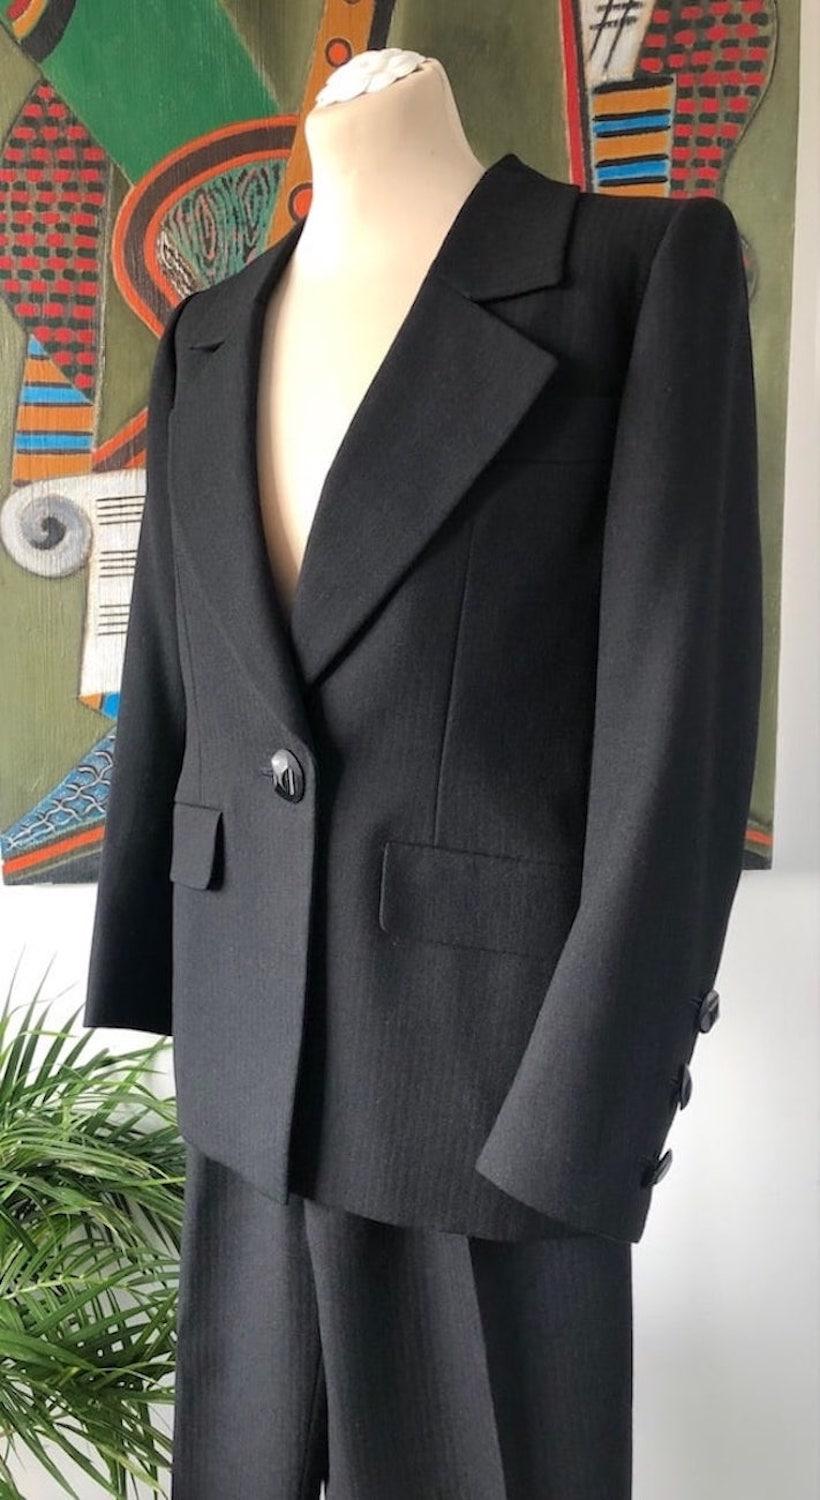 Yves Saint-Laurent Haute Couture no.67931 Circa 1991-1992. A very rare and stunning YSL Haute couture 3 pieces wool suit, a blazer, a trousers and a skirt handcrafted in pin stripe-herringbone pattern. A padded jacket with notched shawl collar,